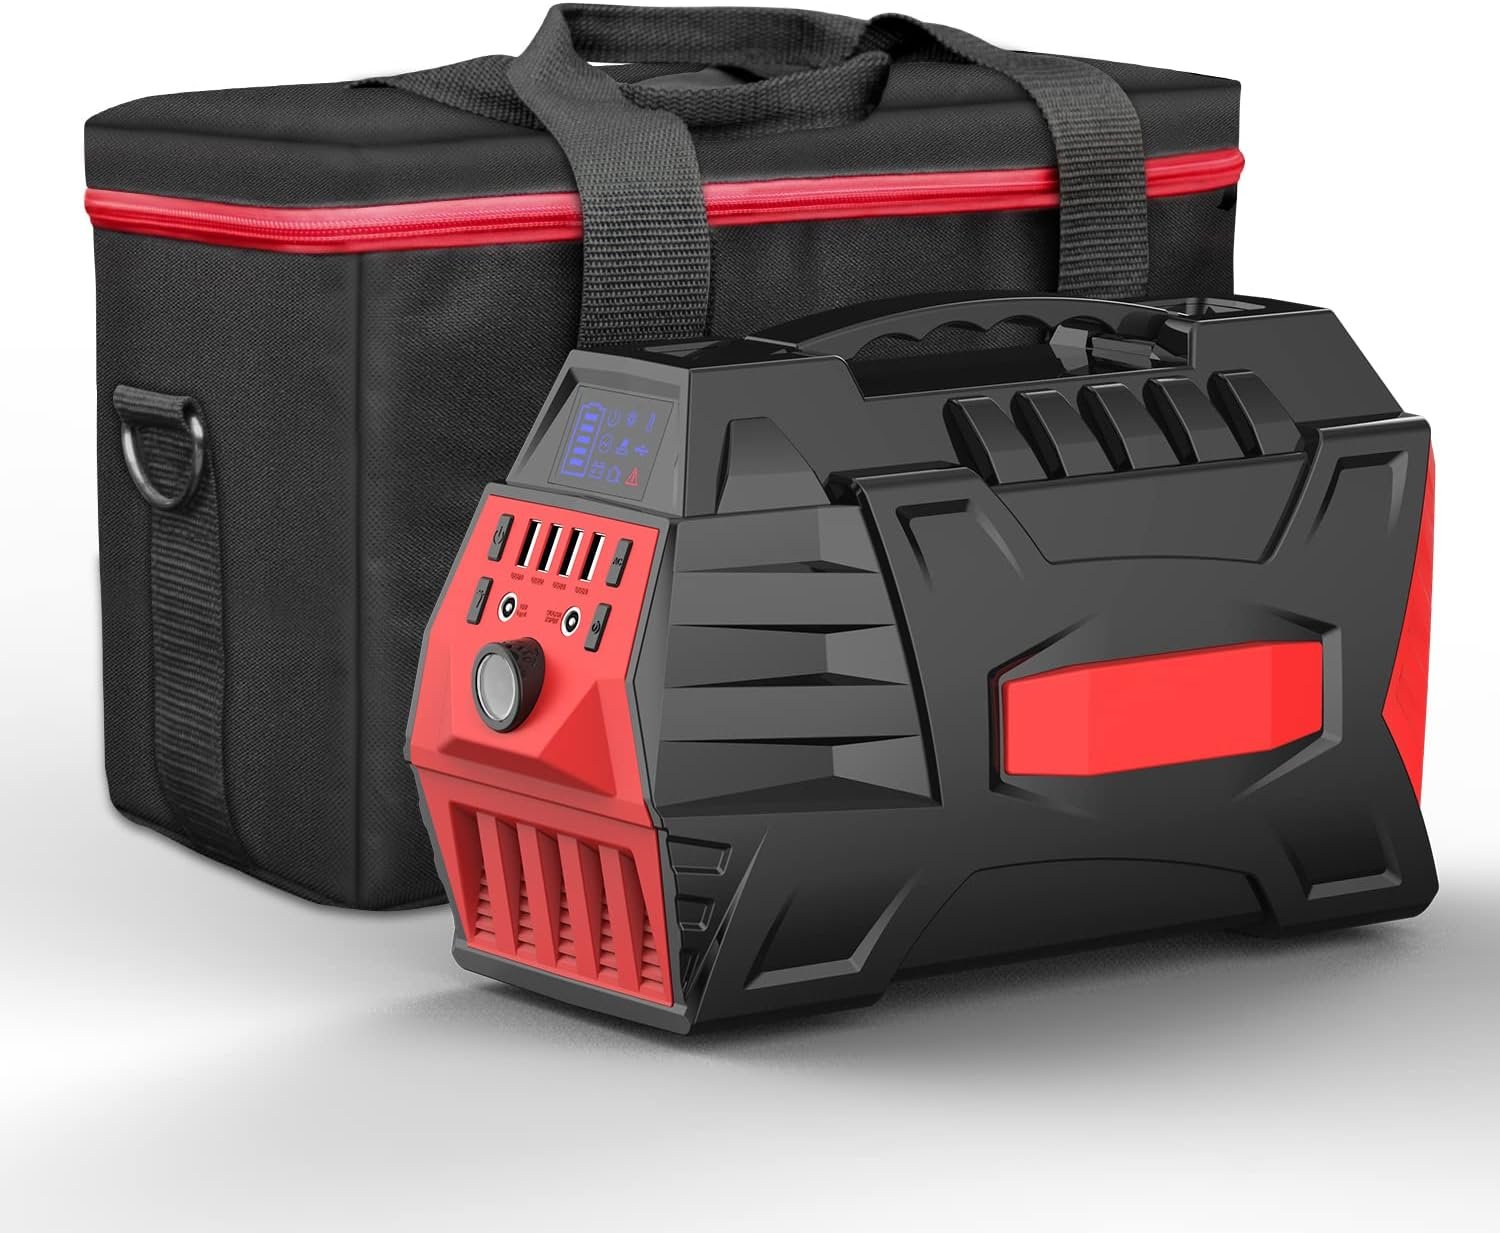 500W Portable Power Station with Carry Bag Review